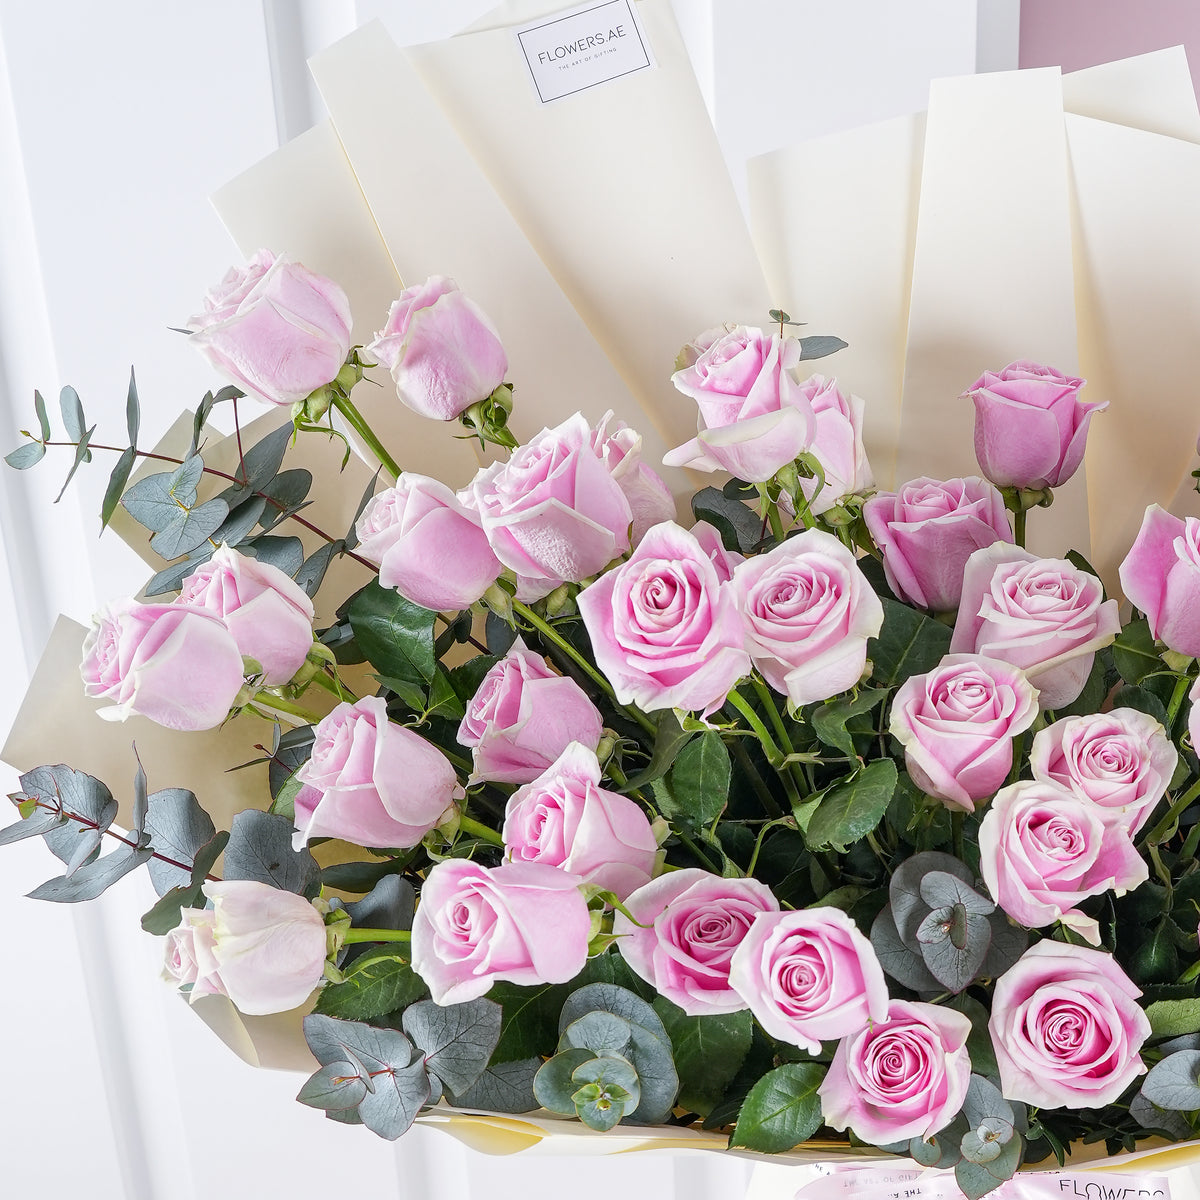 50 Pink Roses